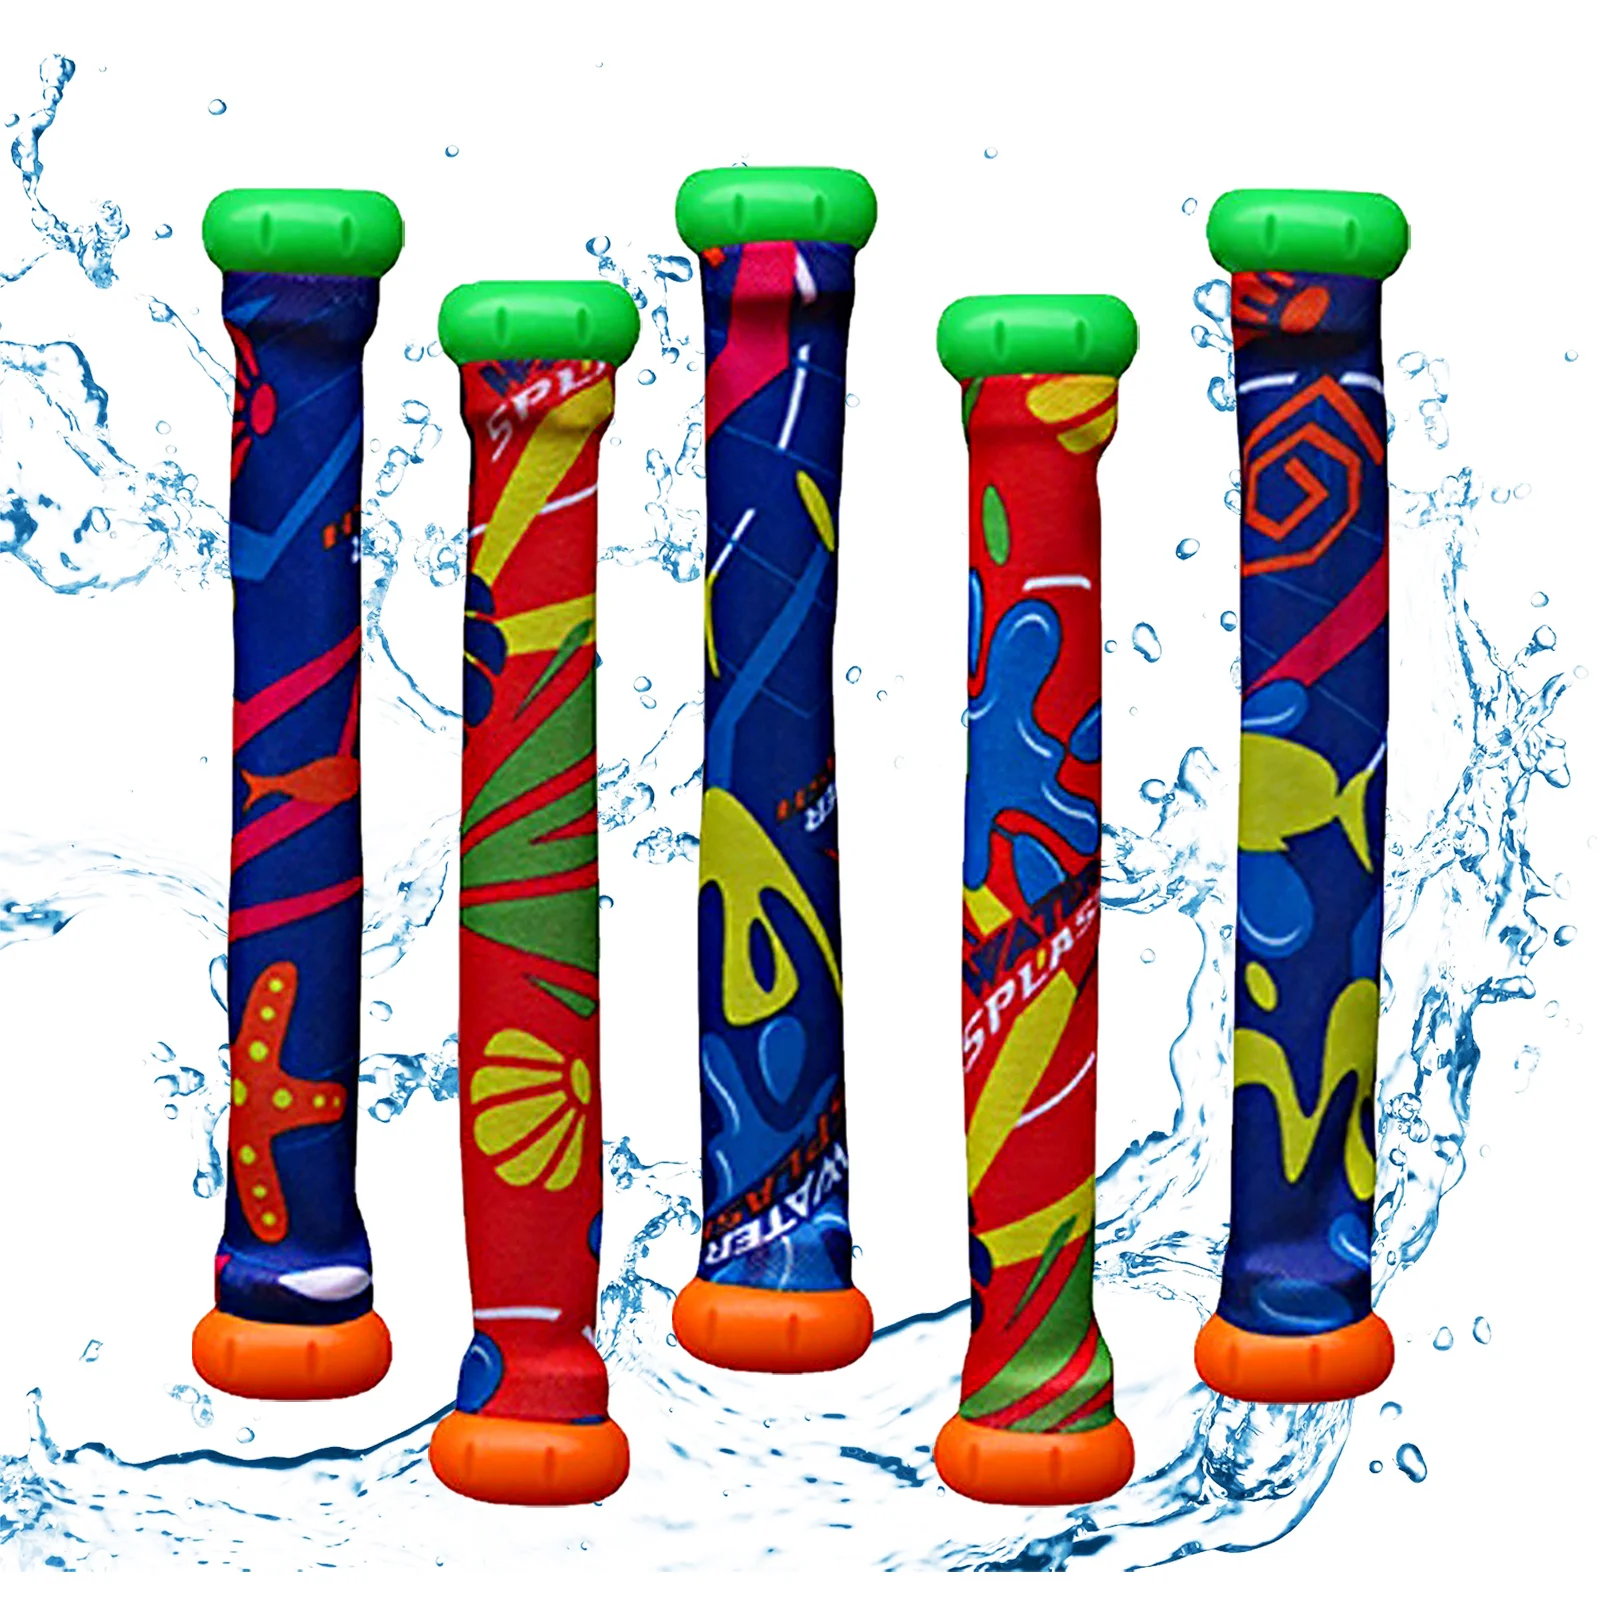 Buy 5pcs Summer Diving Stick Toys Underwater Swimming Pool Toy Under Water Games Training Sticks for Kids 8-12 Years on